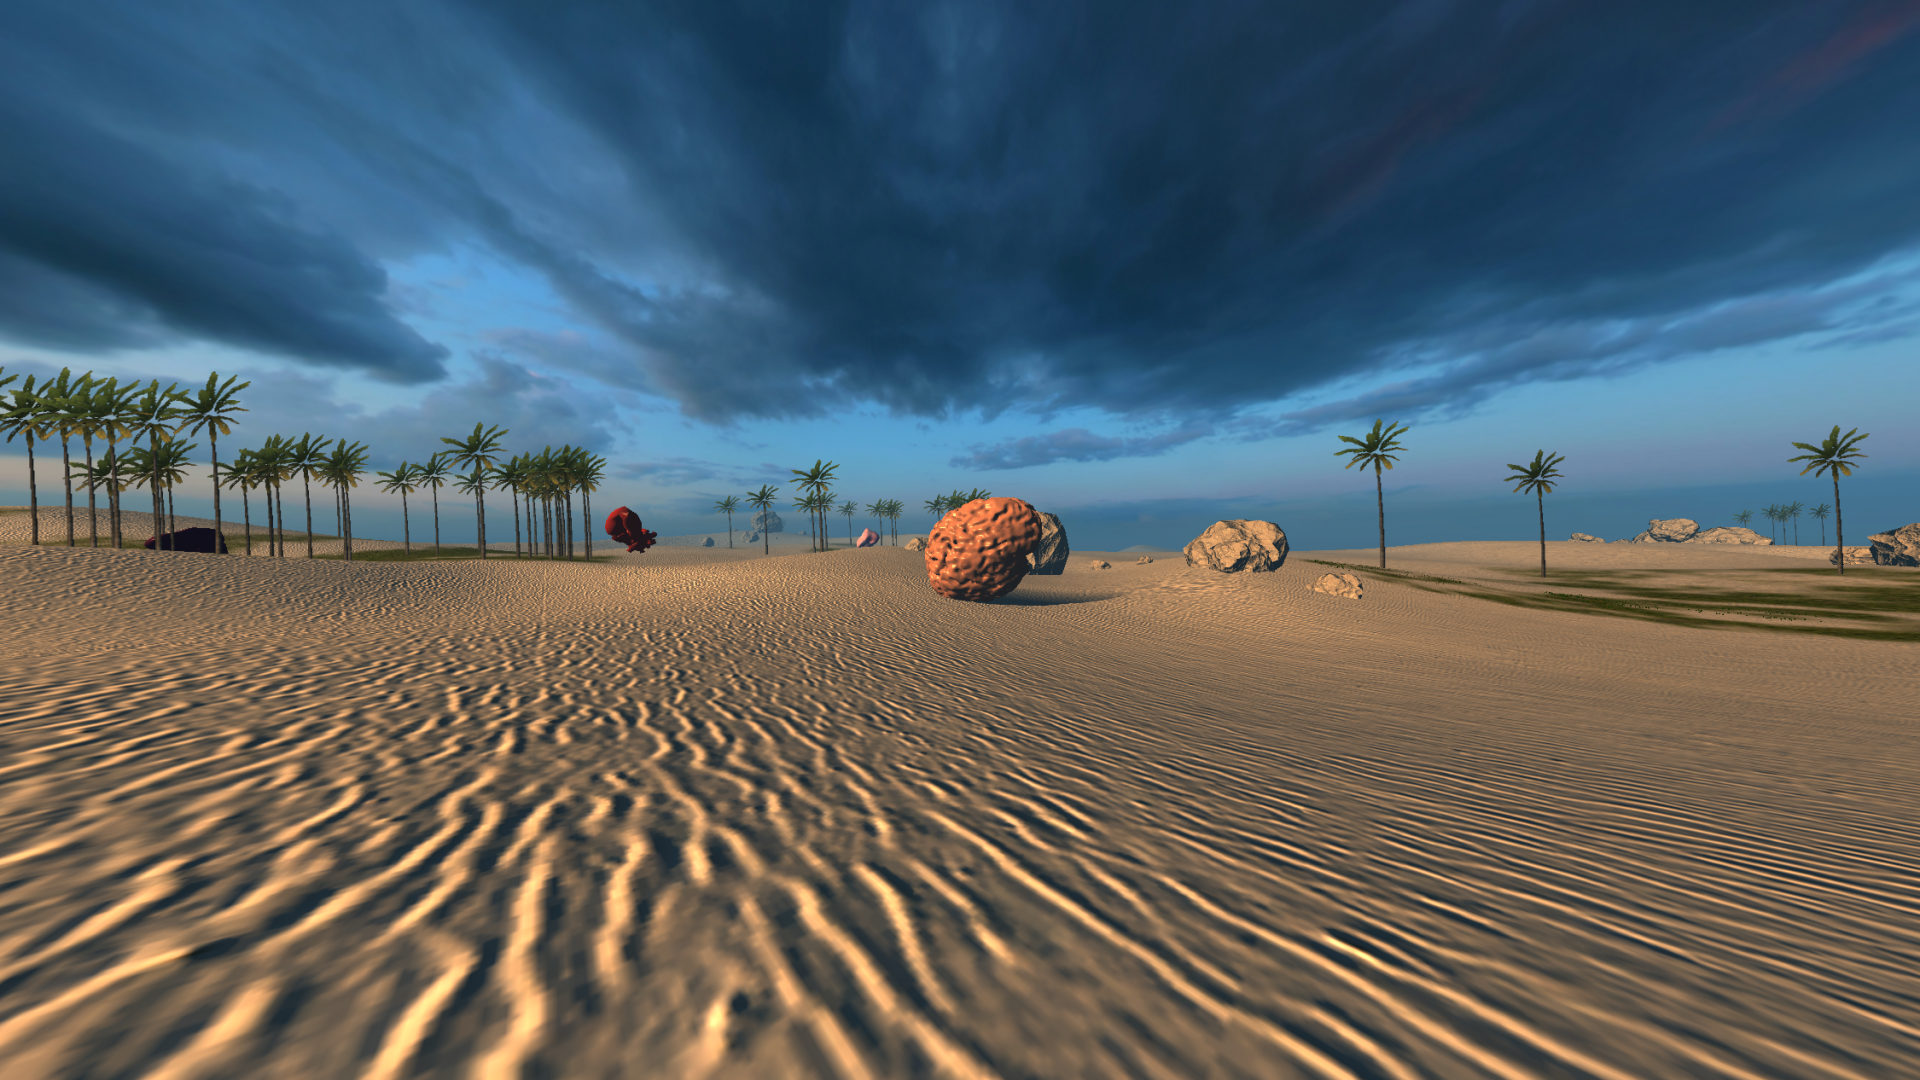 An image from a virtual reality piece, showing a desert with large brains hovering over the sand in the distance, amid palm trees underneath a deep blue sky with gray clouds